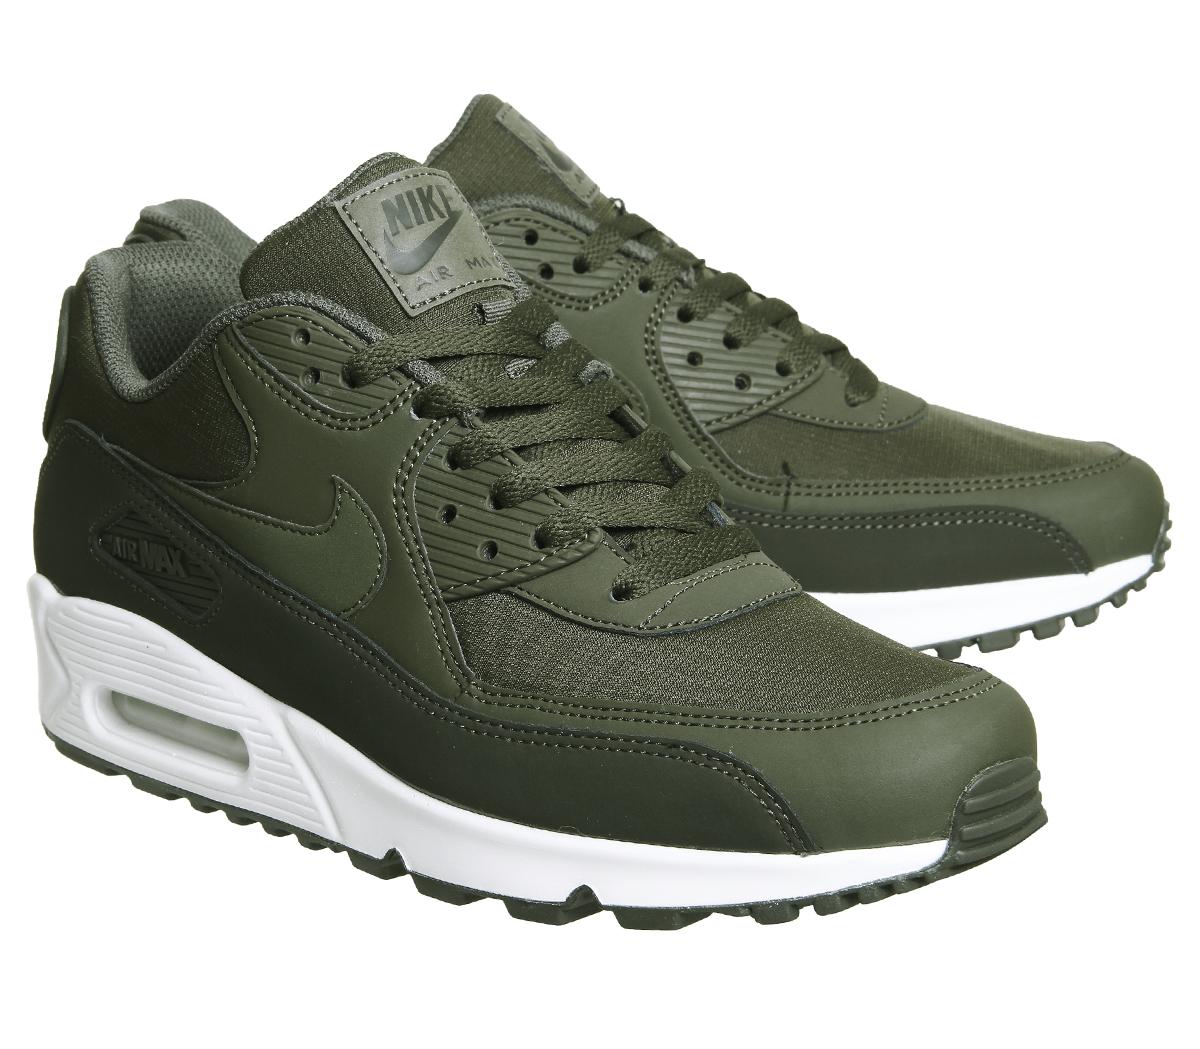 Nike Synthetic Air Max 90 Trainers in 